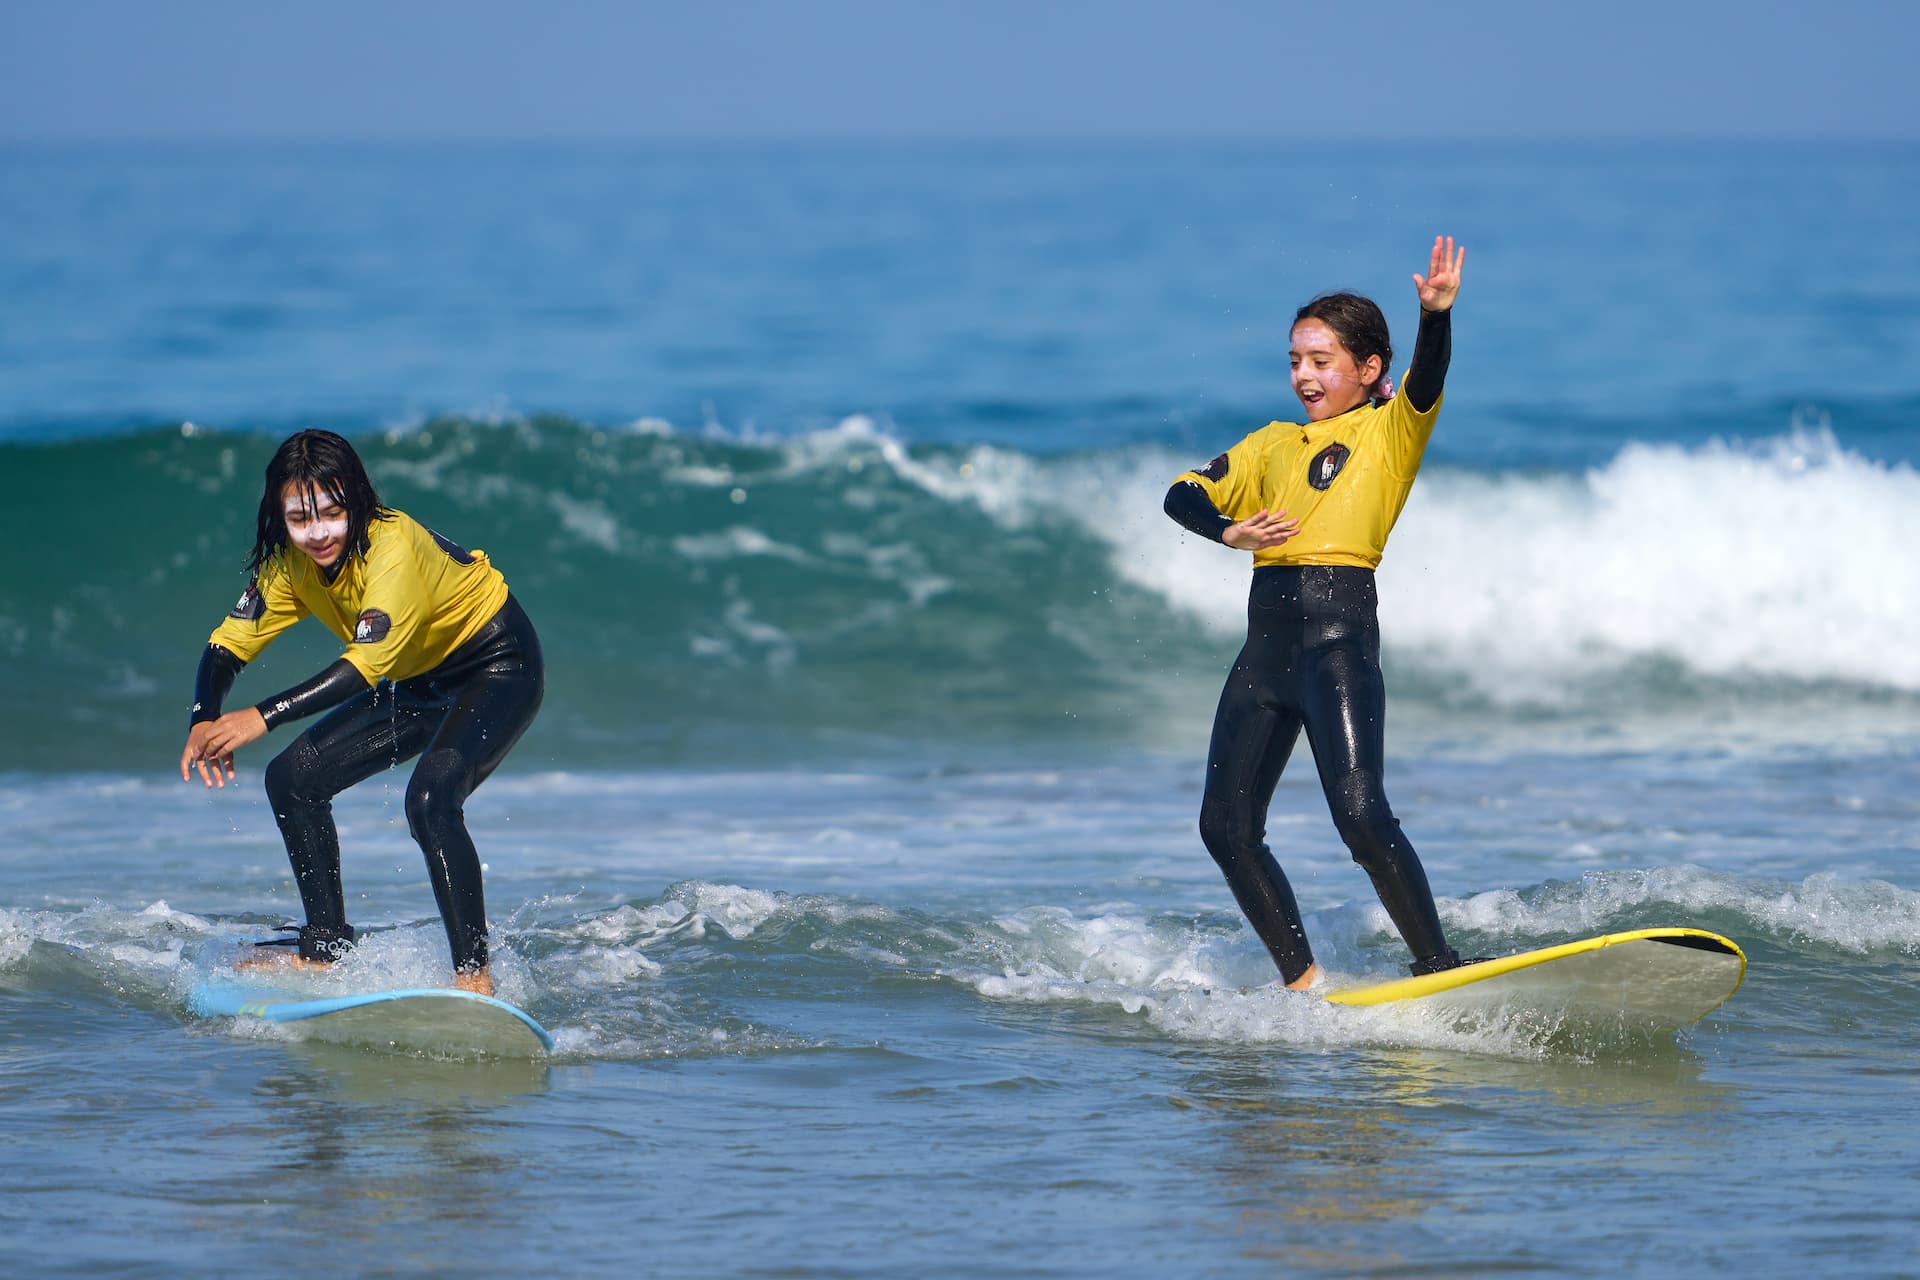 surfing classes near me 